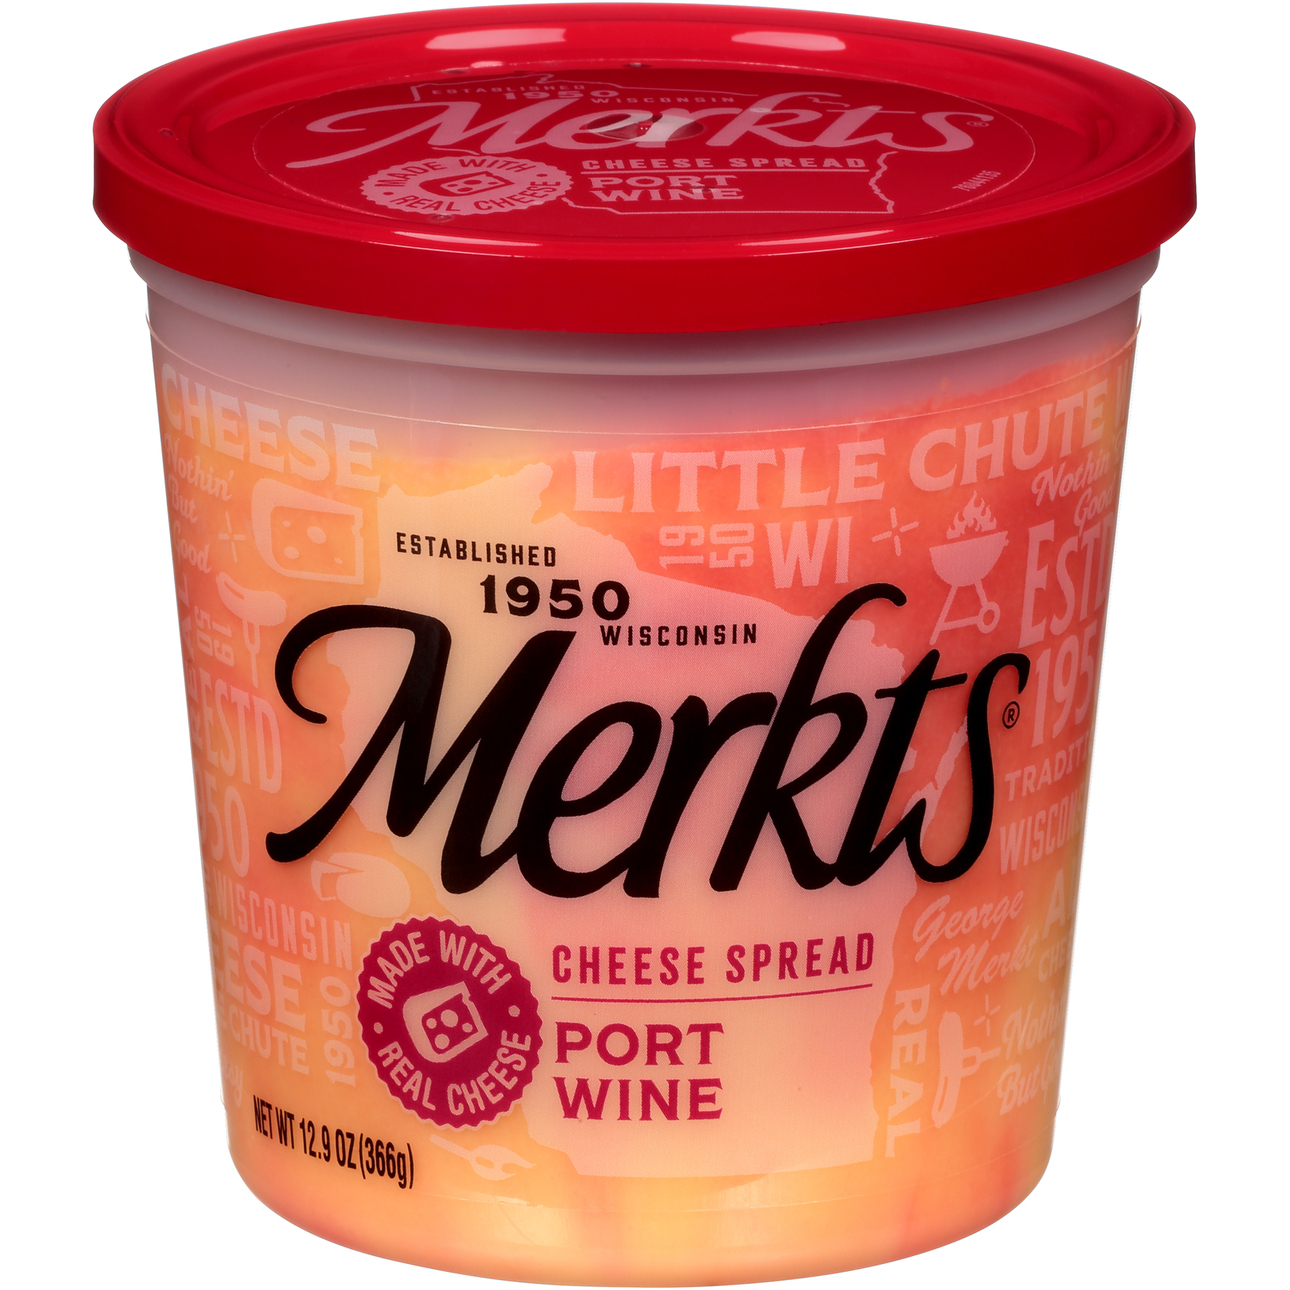 Merkt's Port Wine Cheese Cup Spread, 12.9 oz, Tub, Refrigerated/Chilled - image 1 of 6